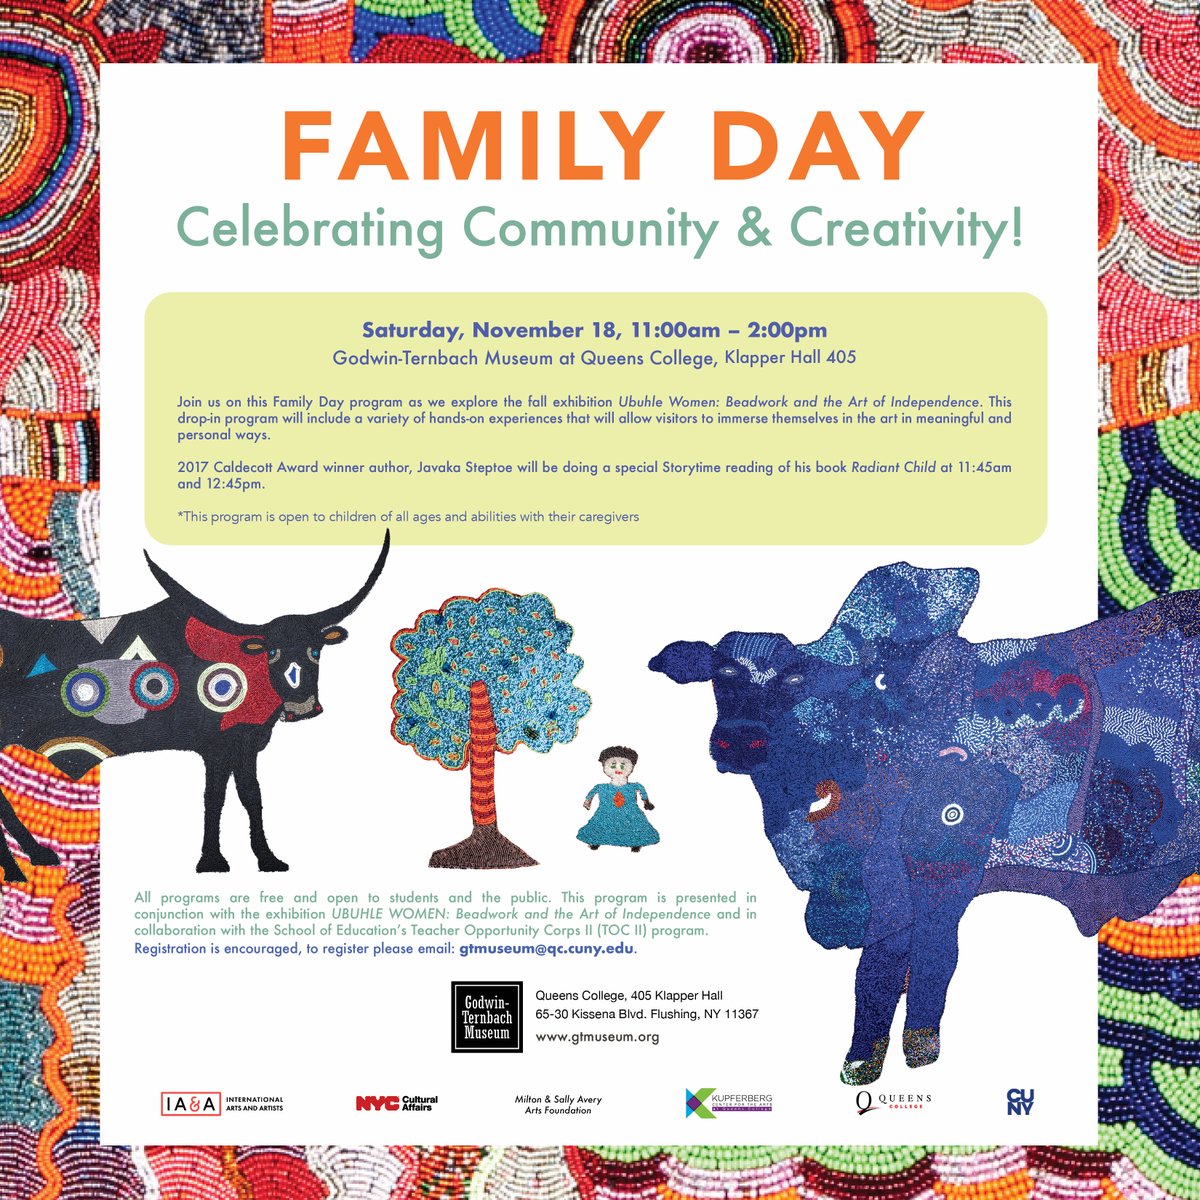 Come and celebrate Family Day with us on Saturday, Nov. 18, from 11am-2pm at the museum. This drop-in program will guide you through art-making experiences that let you connect with the art in a meaningful and creative way. See you there!